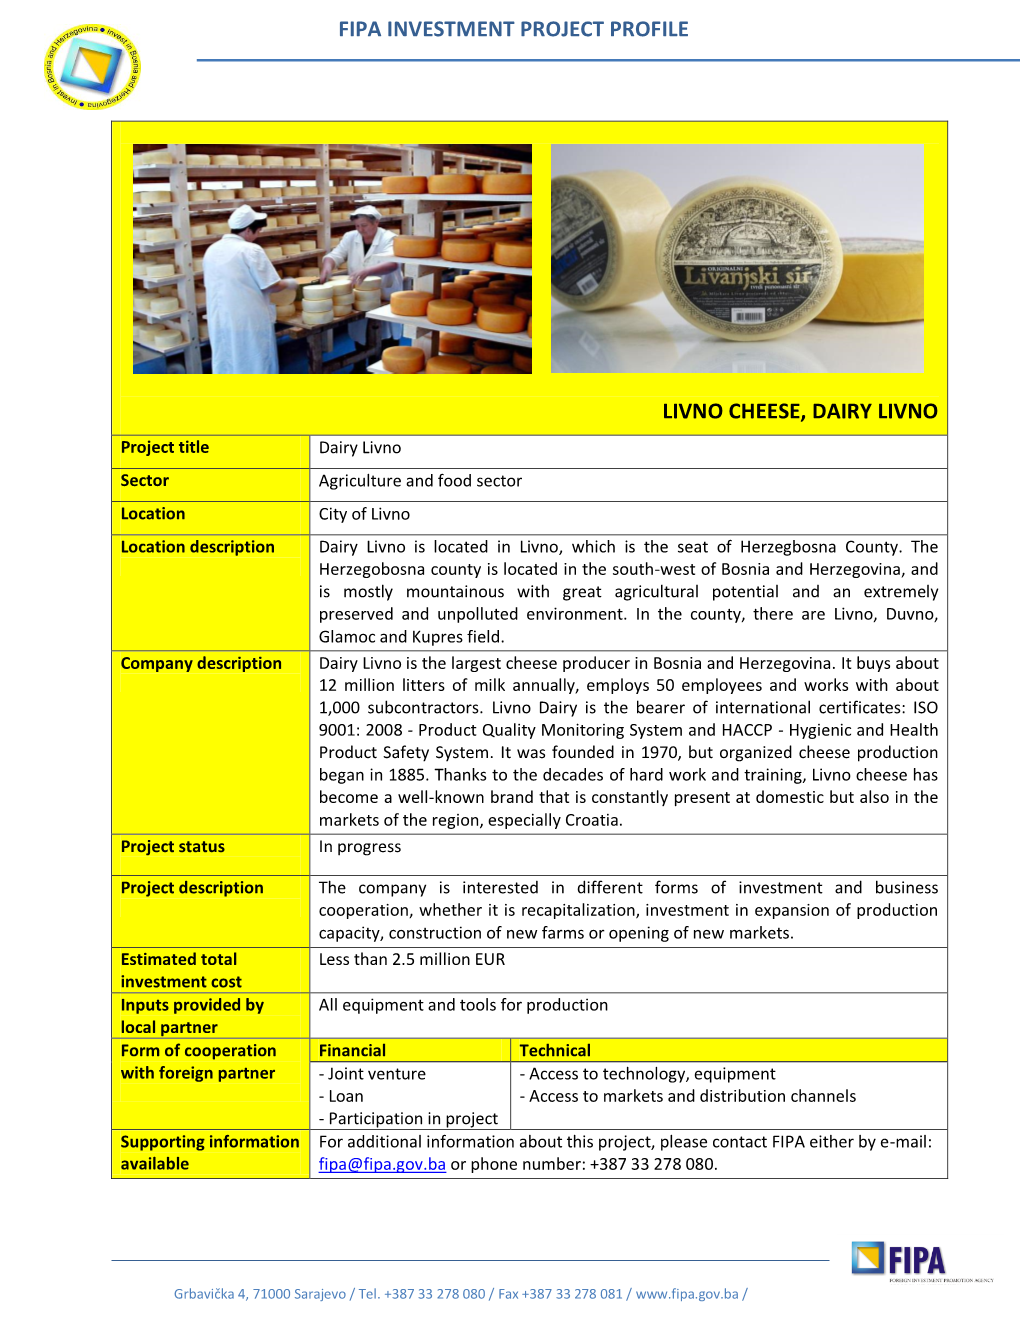 Fipa Investment Project Profile Livno Cheese, Dairy